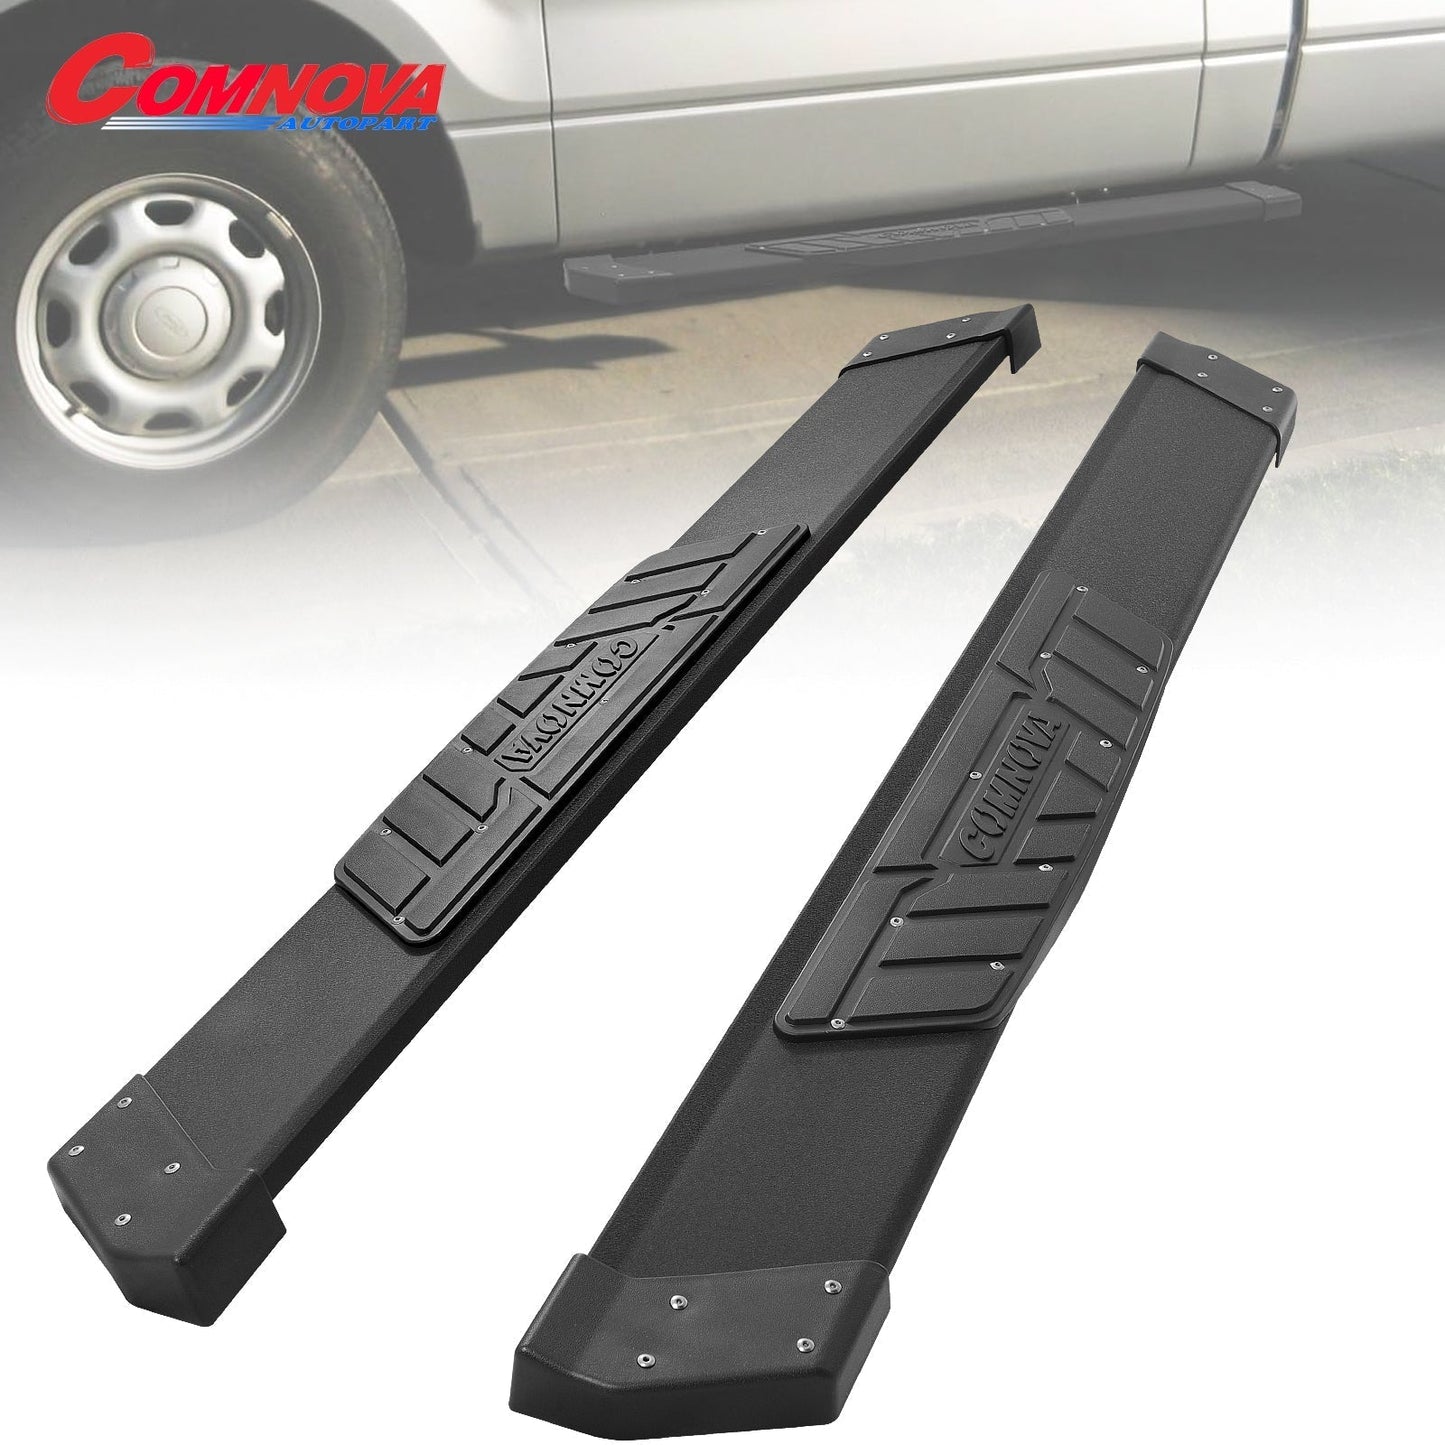 Aluminum Running Boards Compatible with 2007-2018 Chevy Silverado/Gmc Sierra 1500 ＆ 2007-2019 2500/3500 Regular Cab K65 Style.-COMNOVA AOTOPART